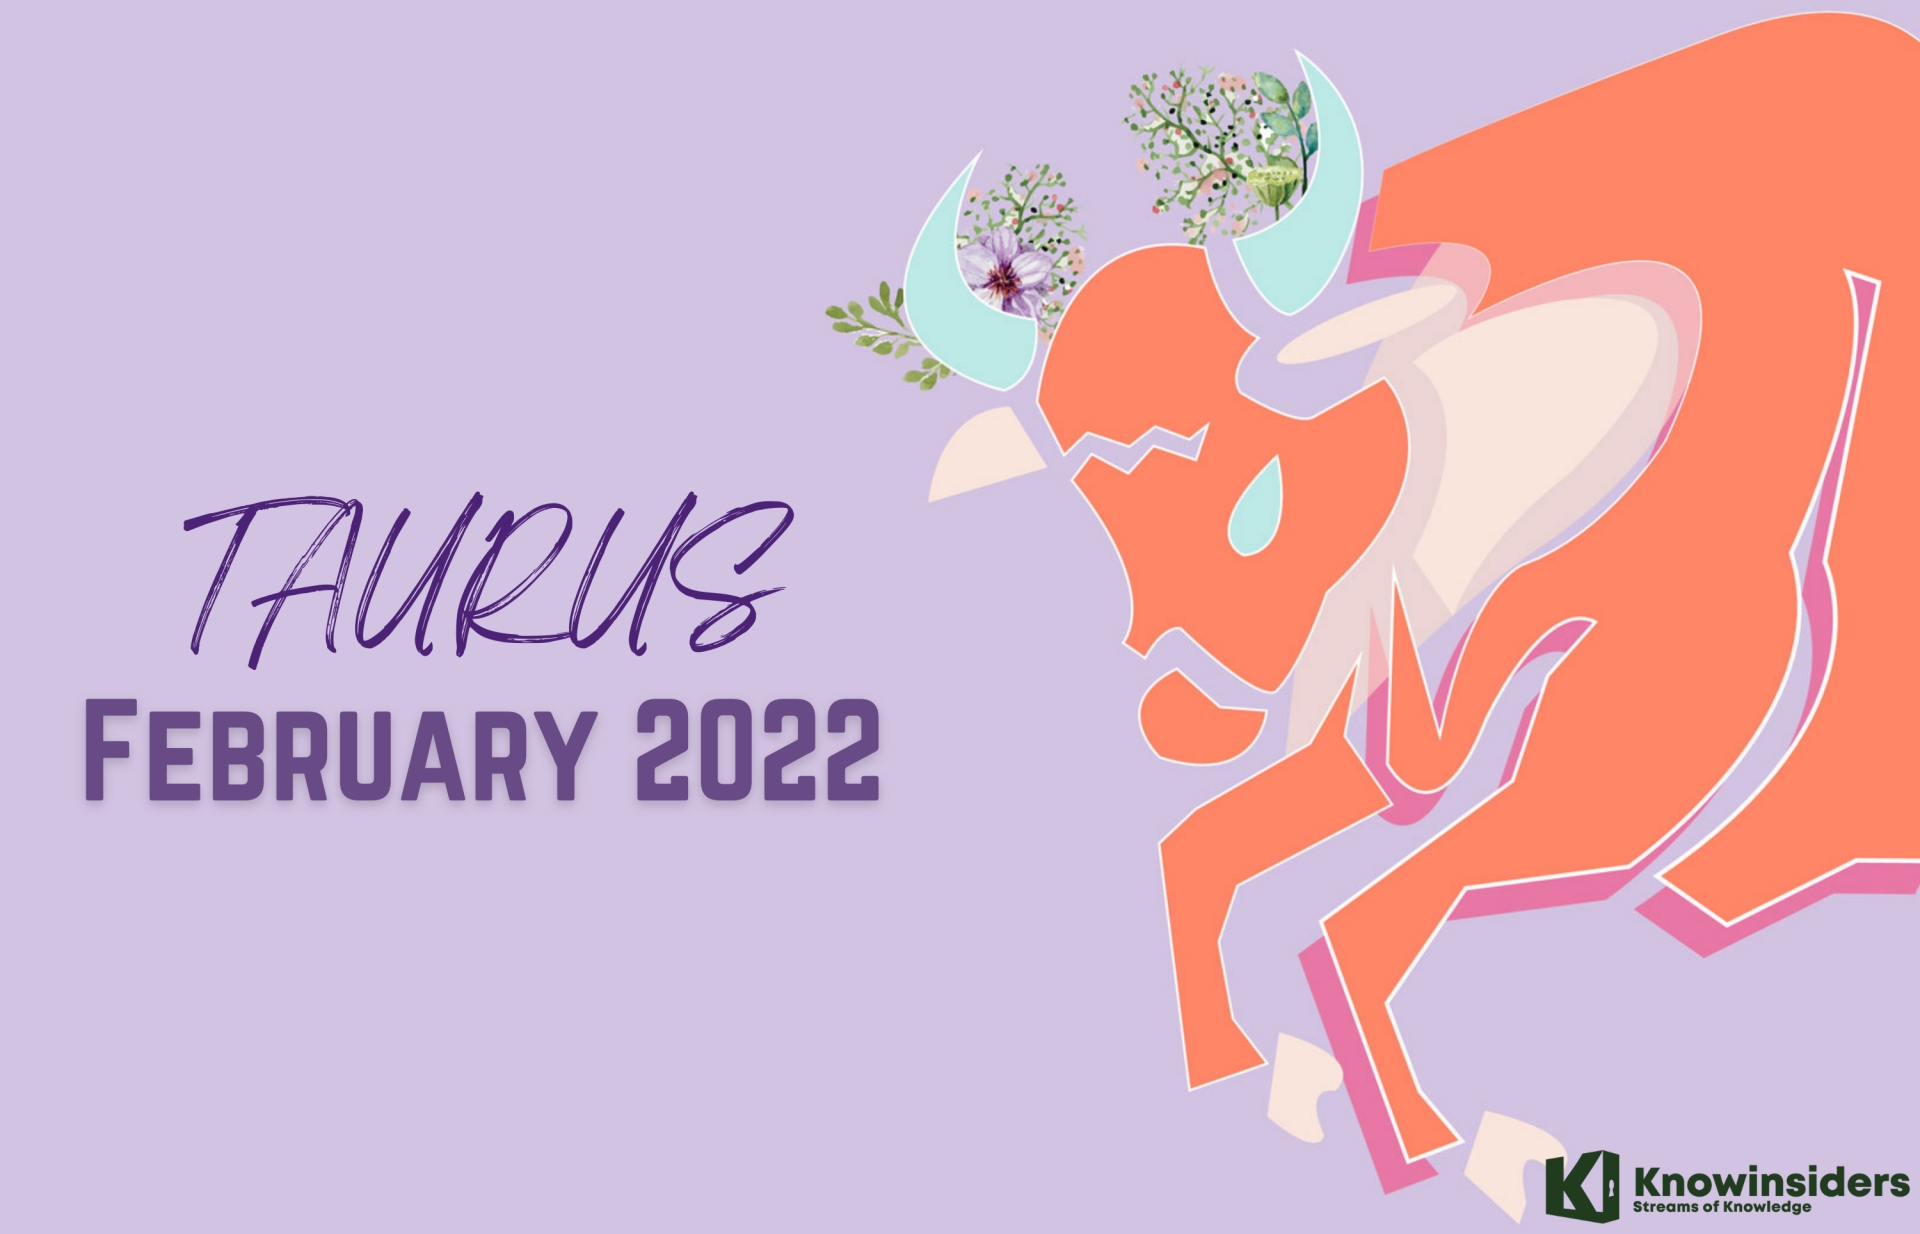 taurus february 2022 horoscope monthly prediction for love career money and health